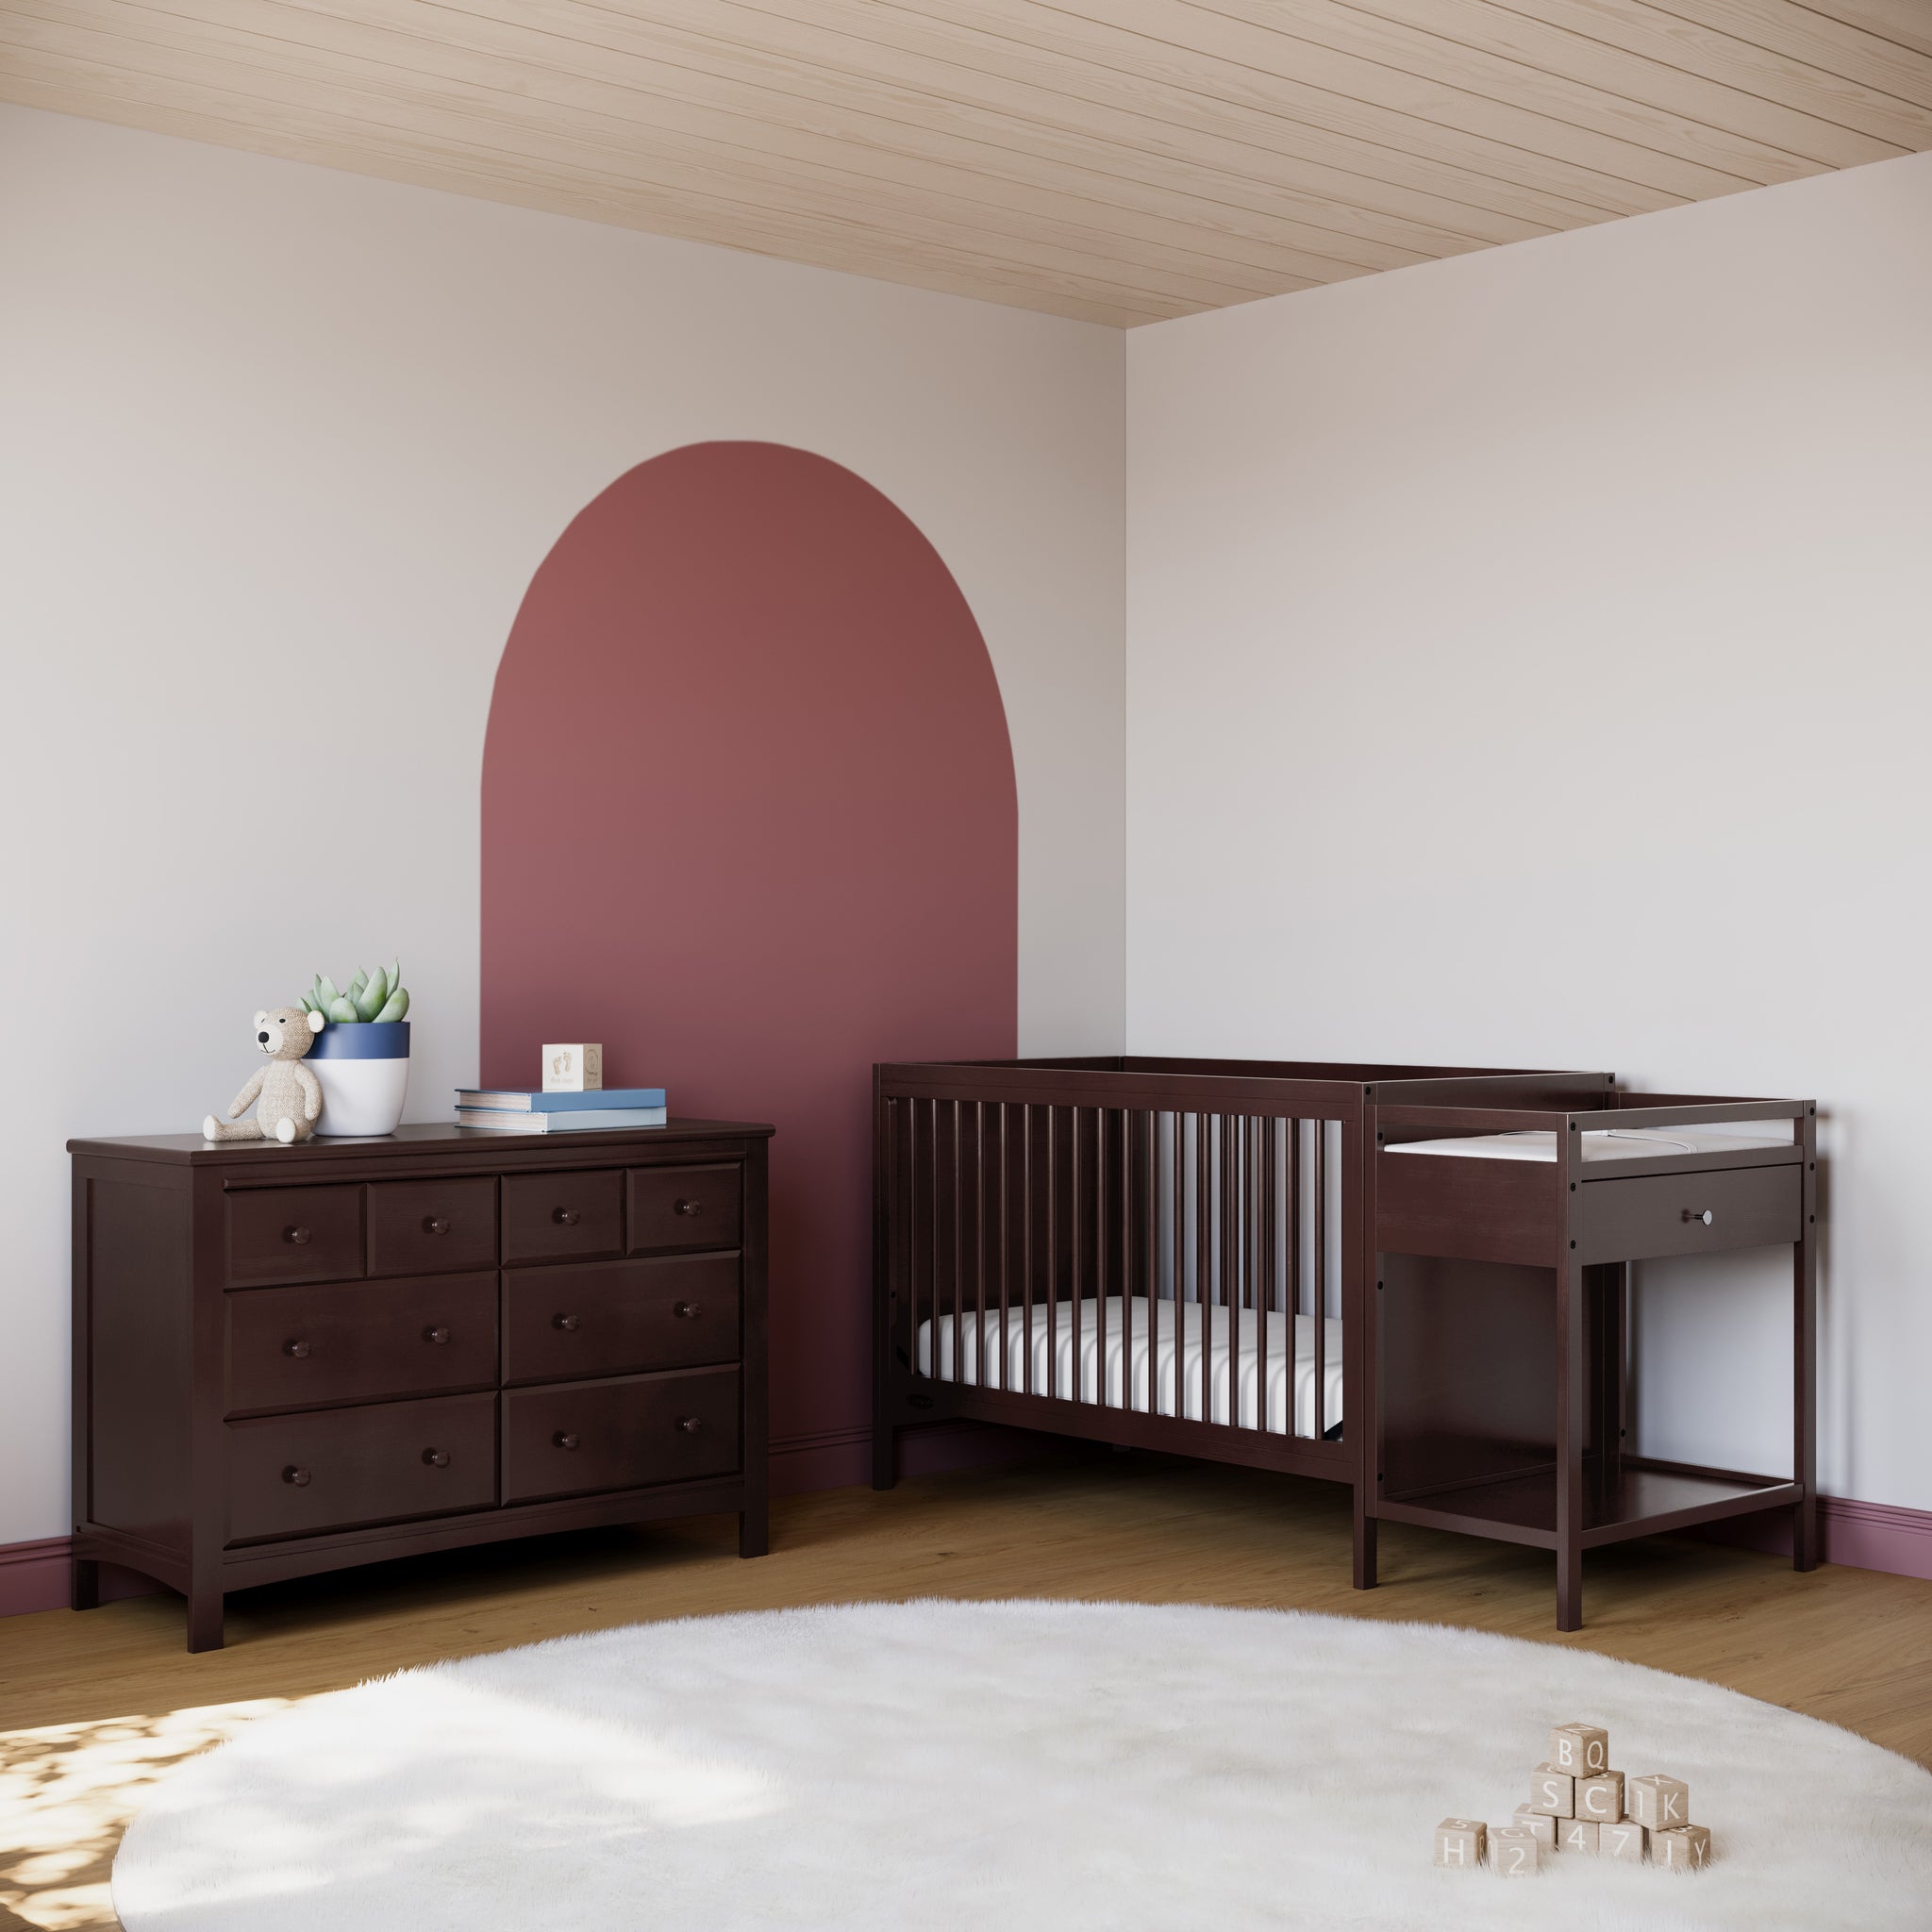 espresso crib and changer in nursery